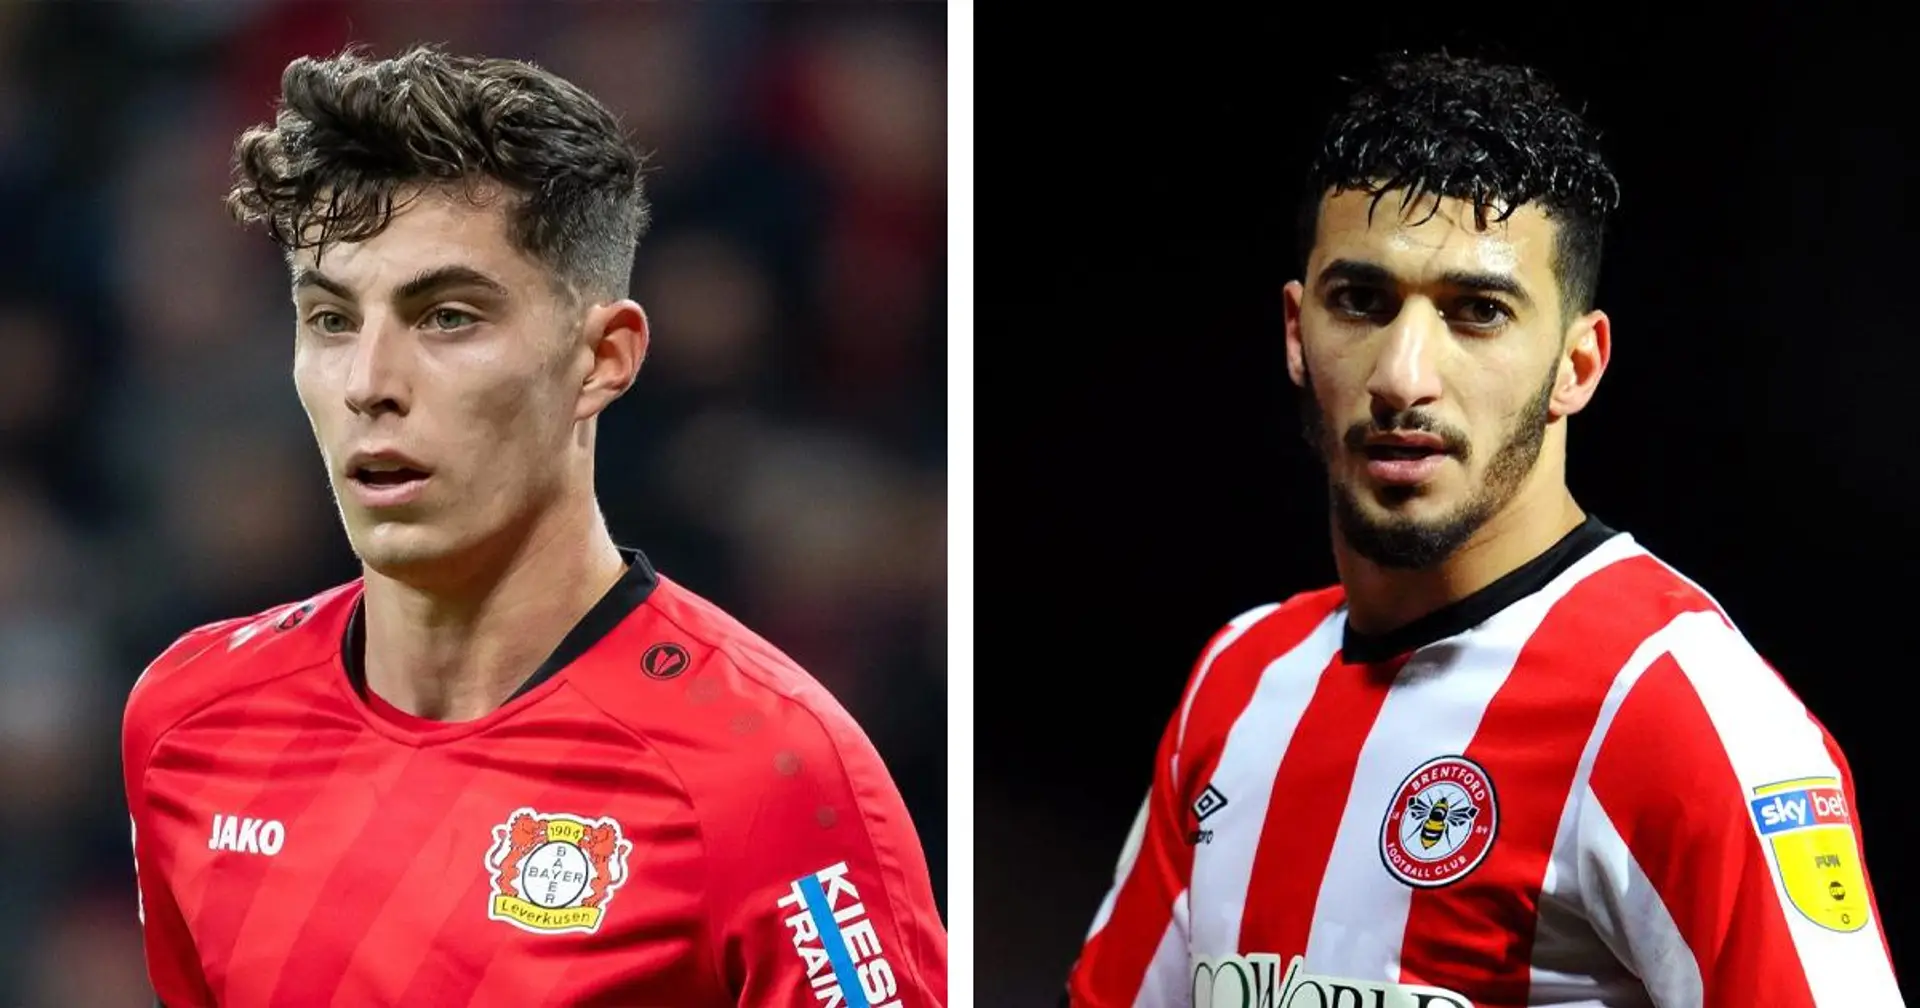 Havertz or Benrahma for Chelsea? Here are my thoughts